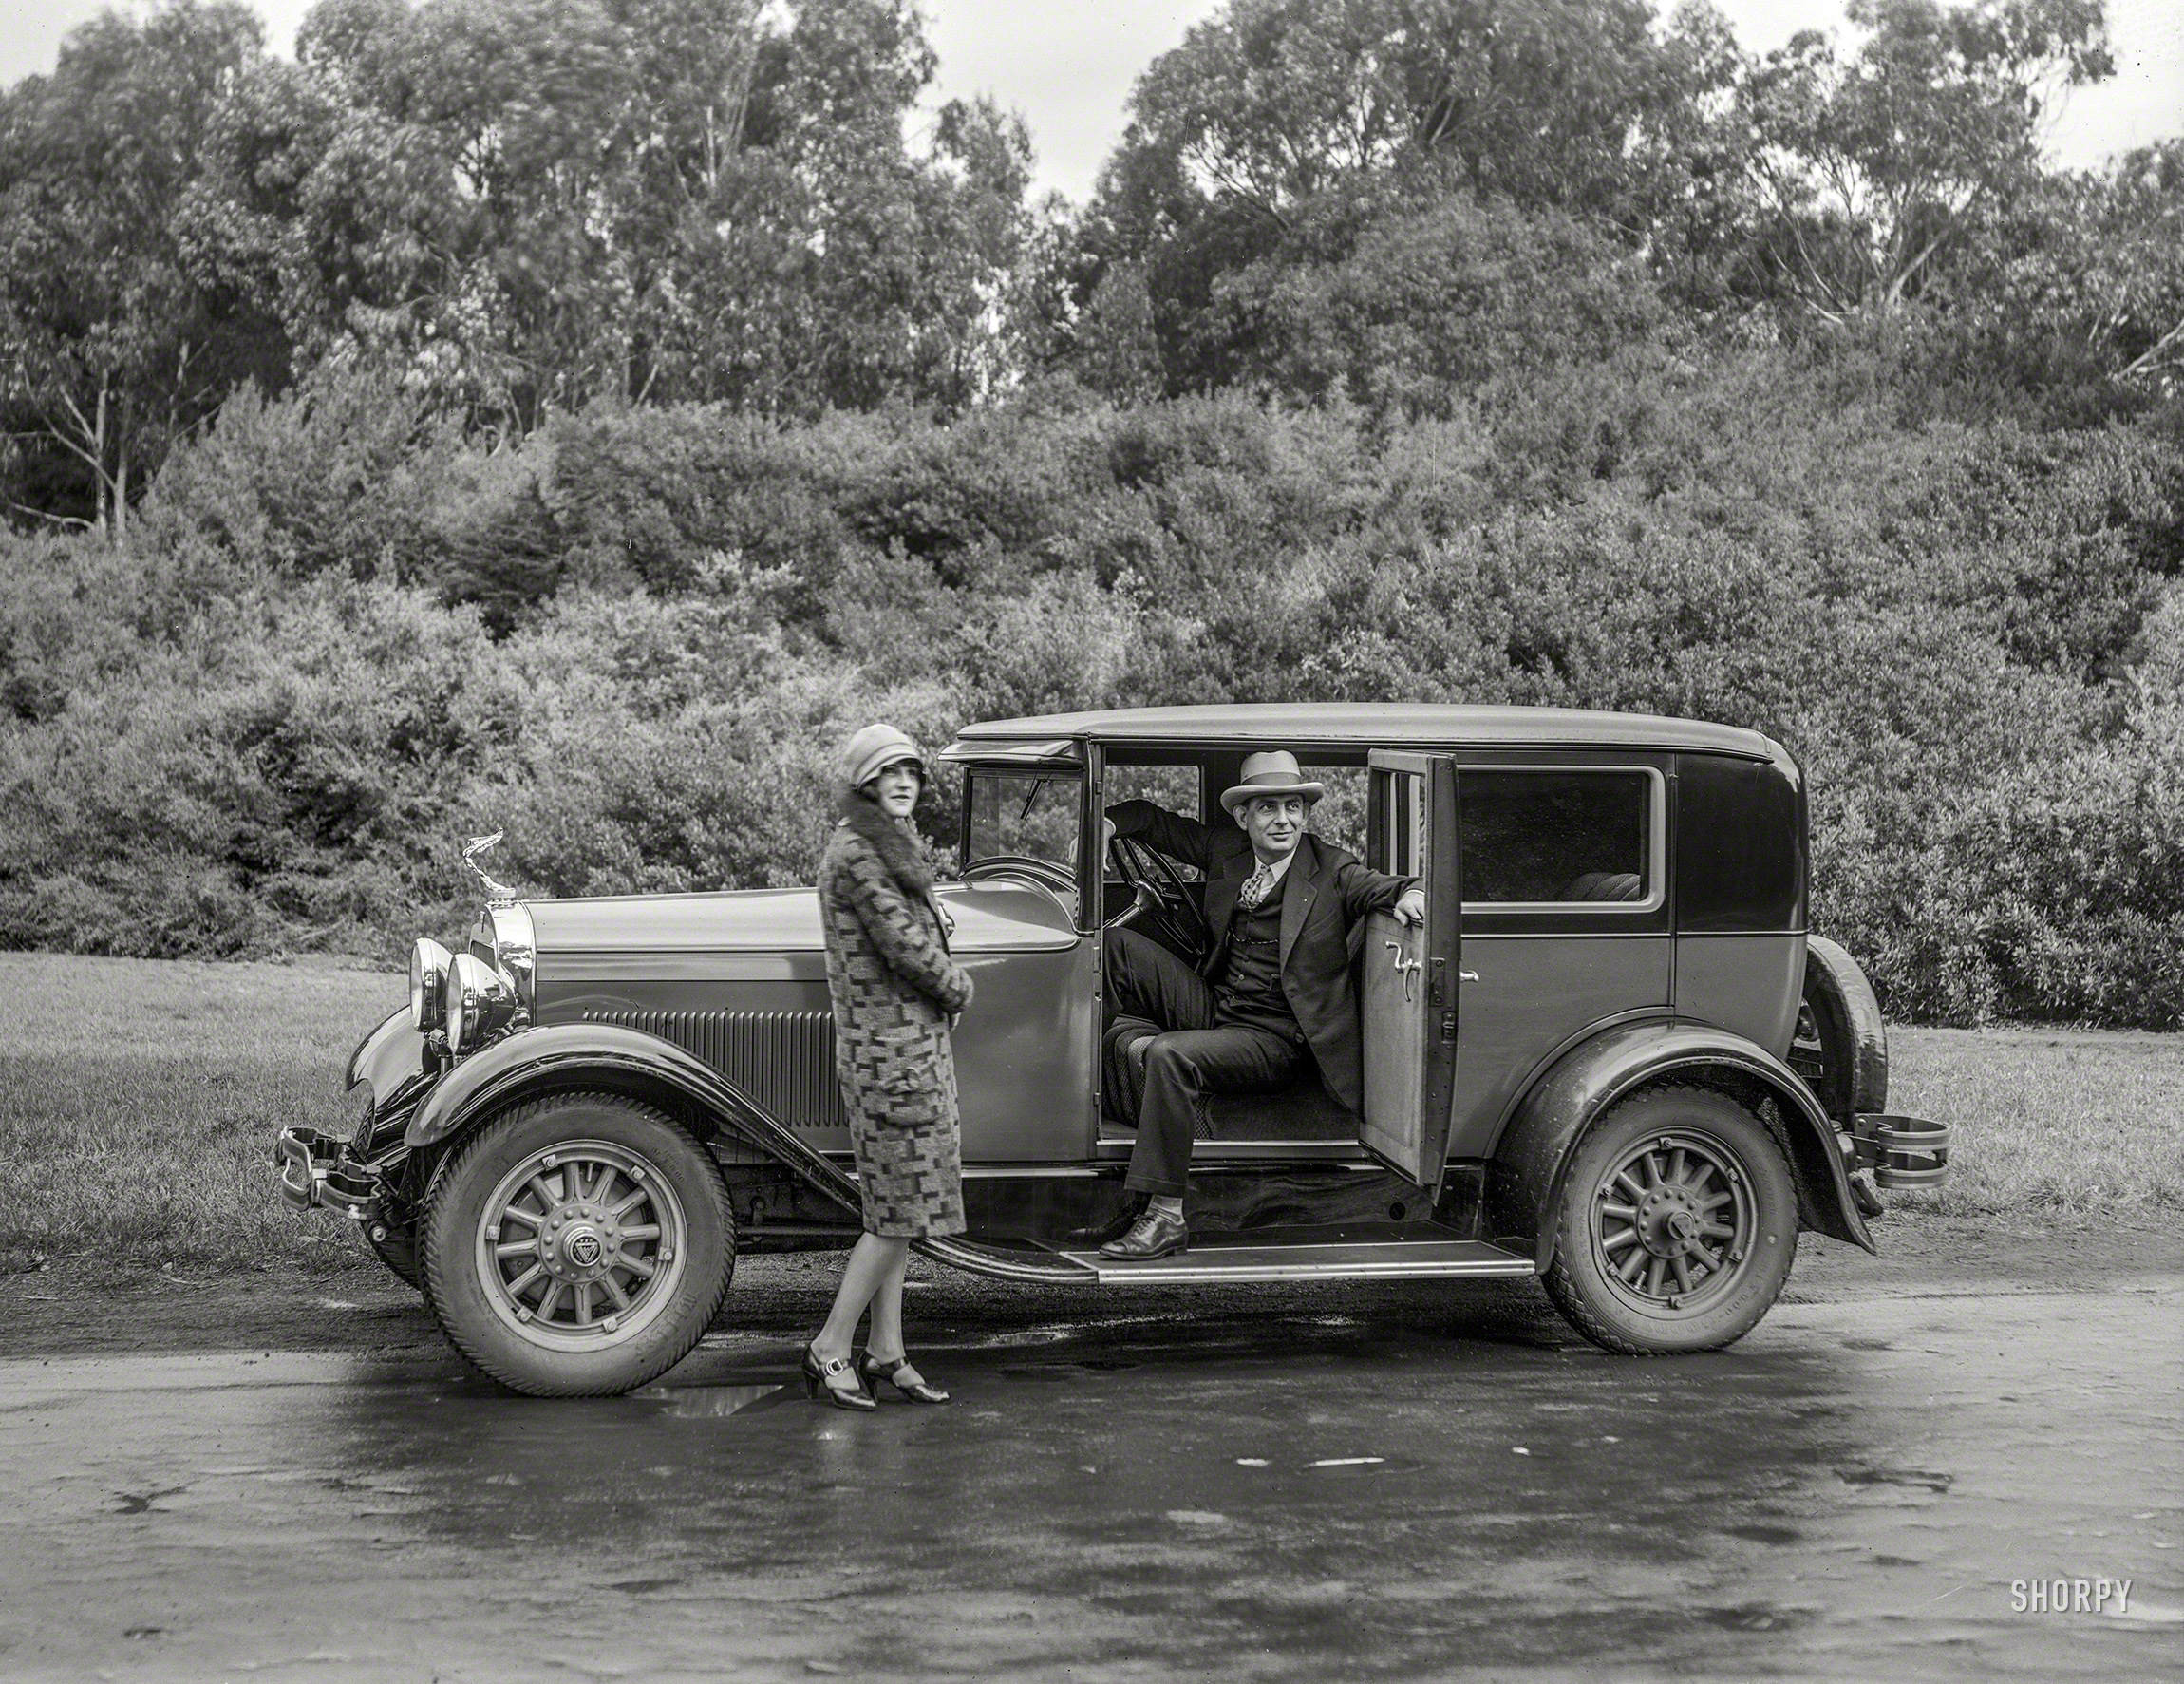 San Francisco, 1928. "Hudson Super Six Sedan at Golden Gate Park." Latest entrant in the Shorpy Cavalcade of Cretaceous Conveyances. 5x7 glass negative by Christopher Helin. View full size.